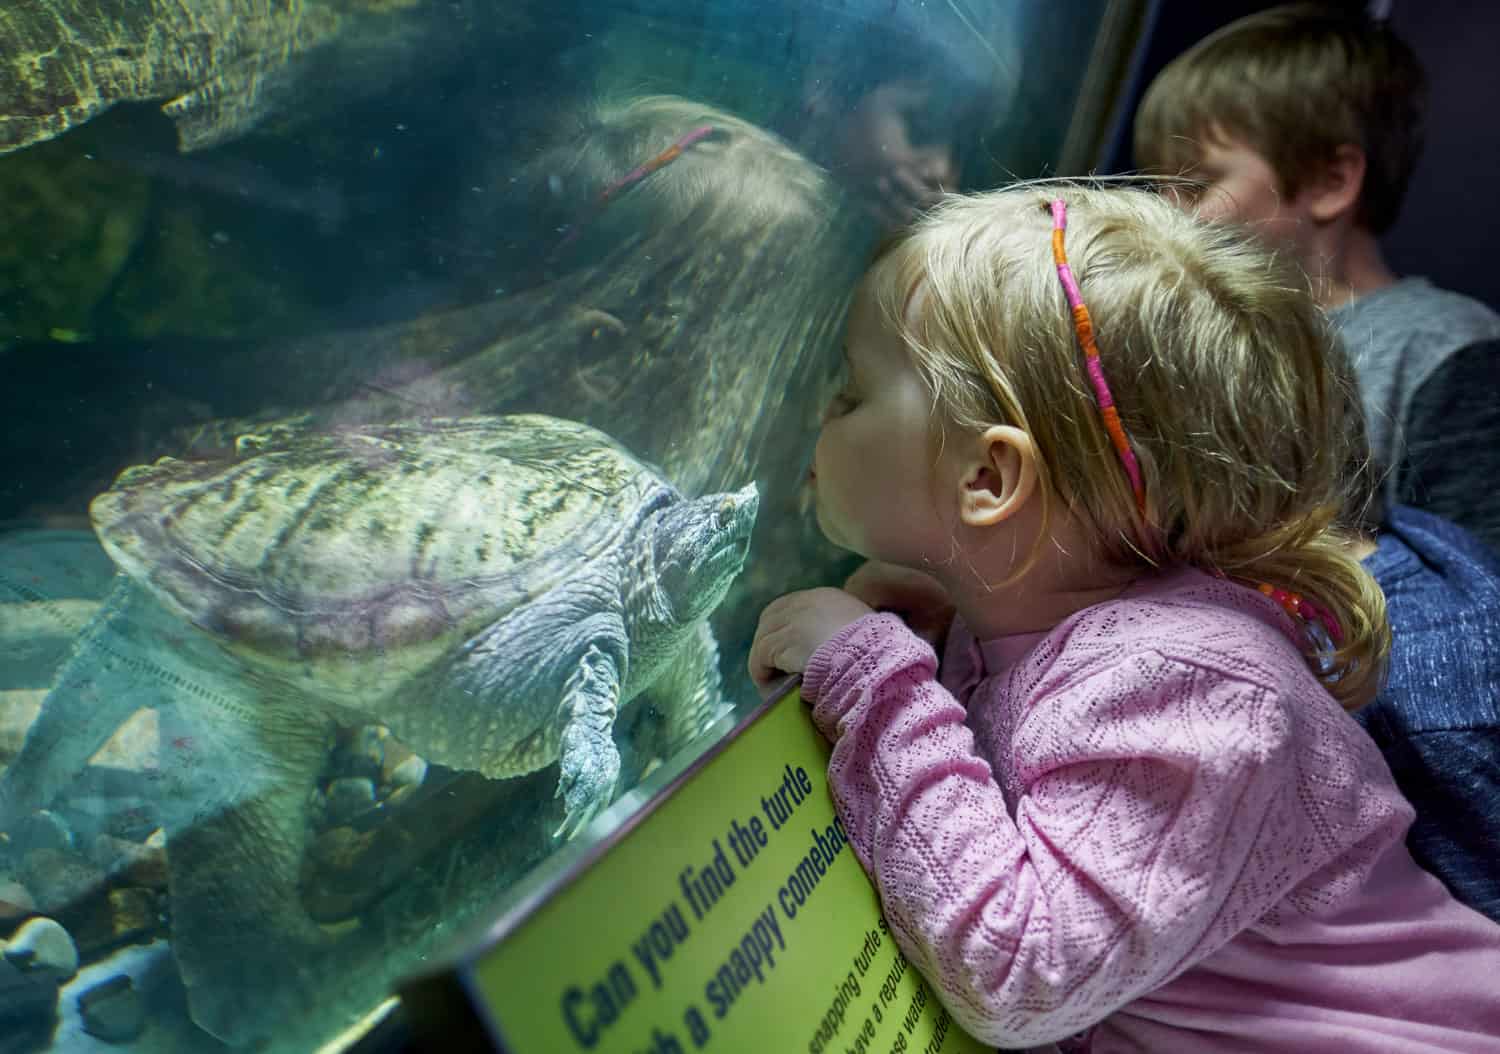 ECHO, Leahy Center for Lake Champlain - Kids looking at Turtles